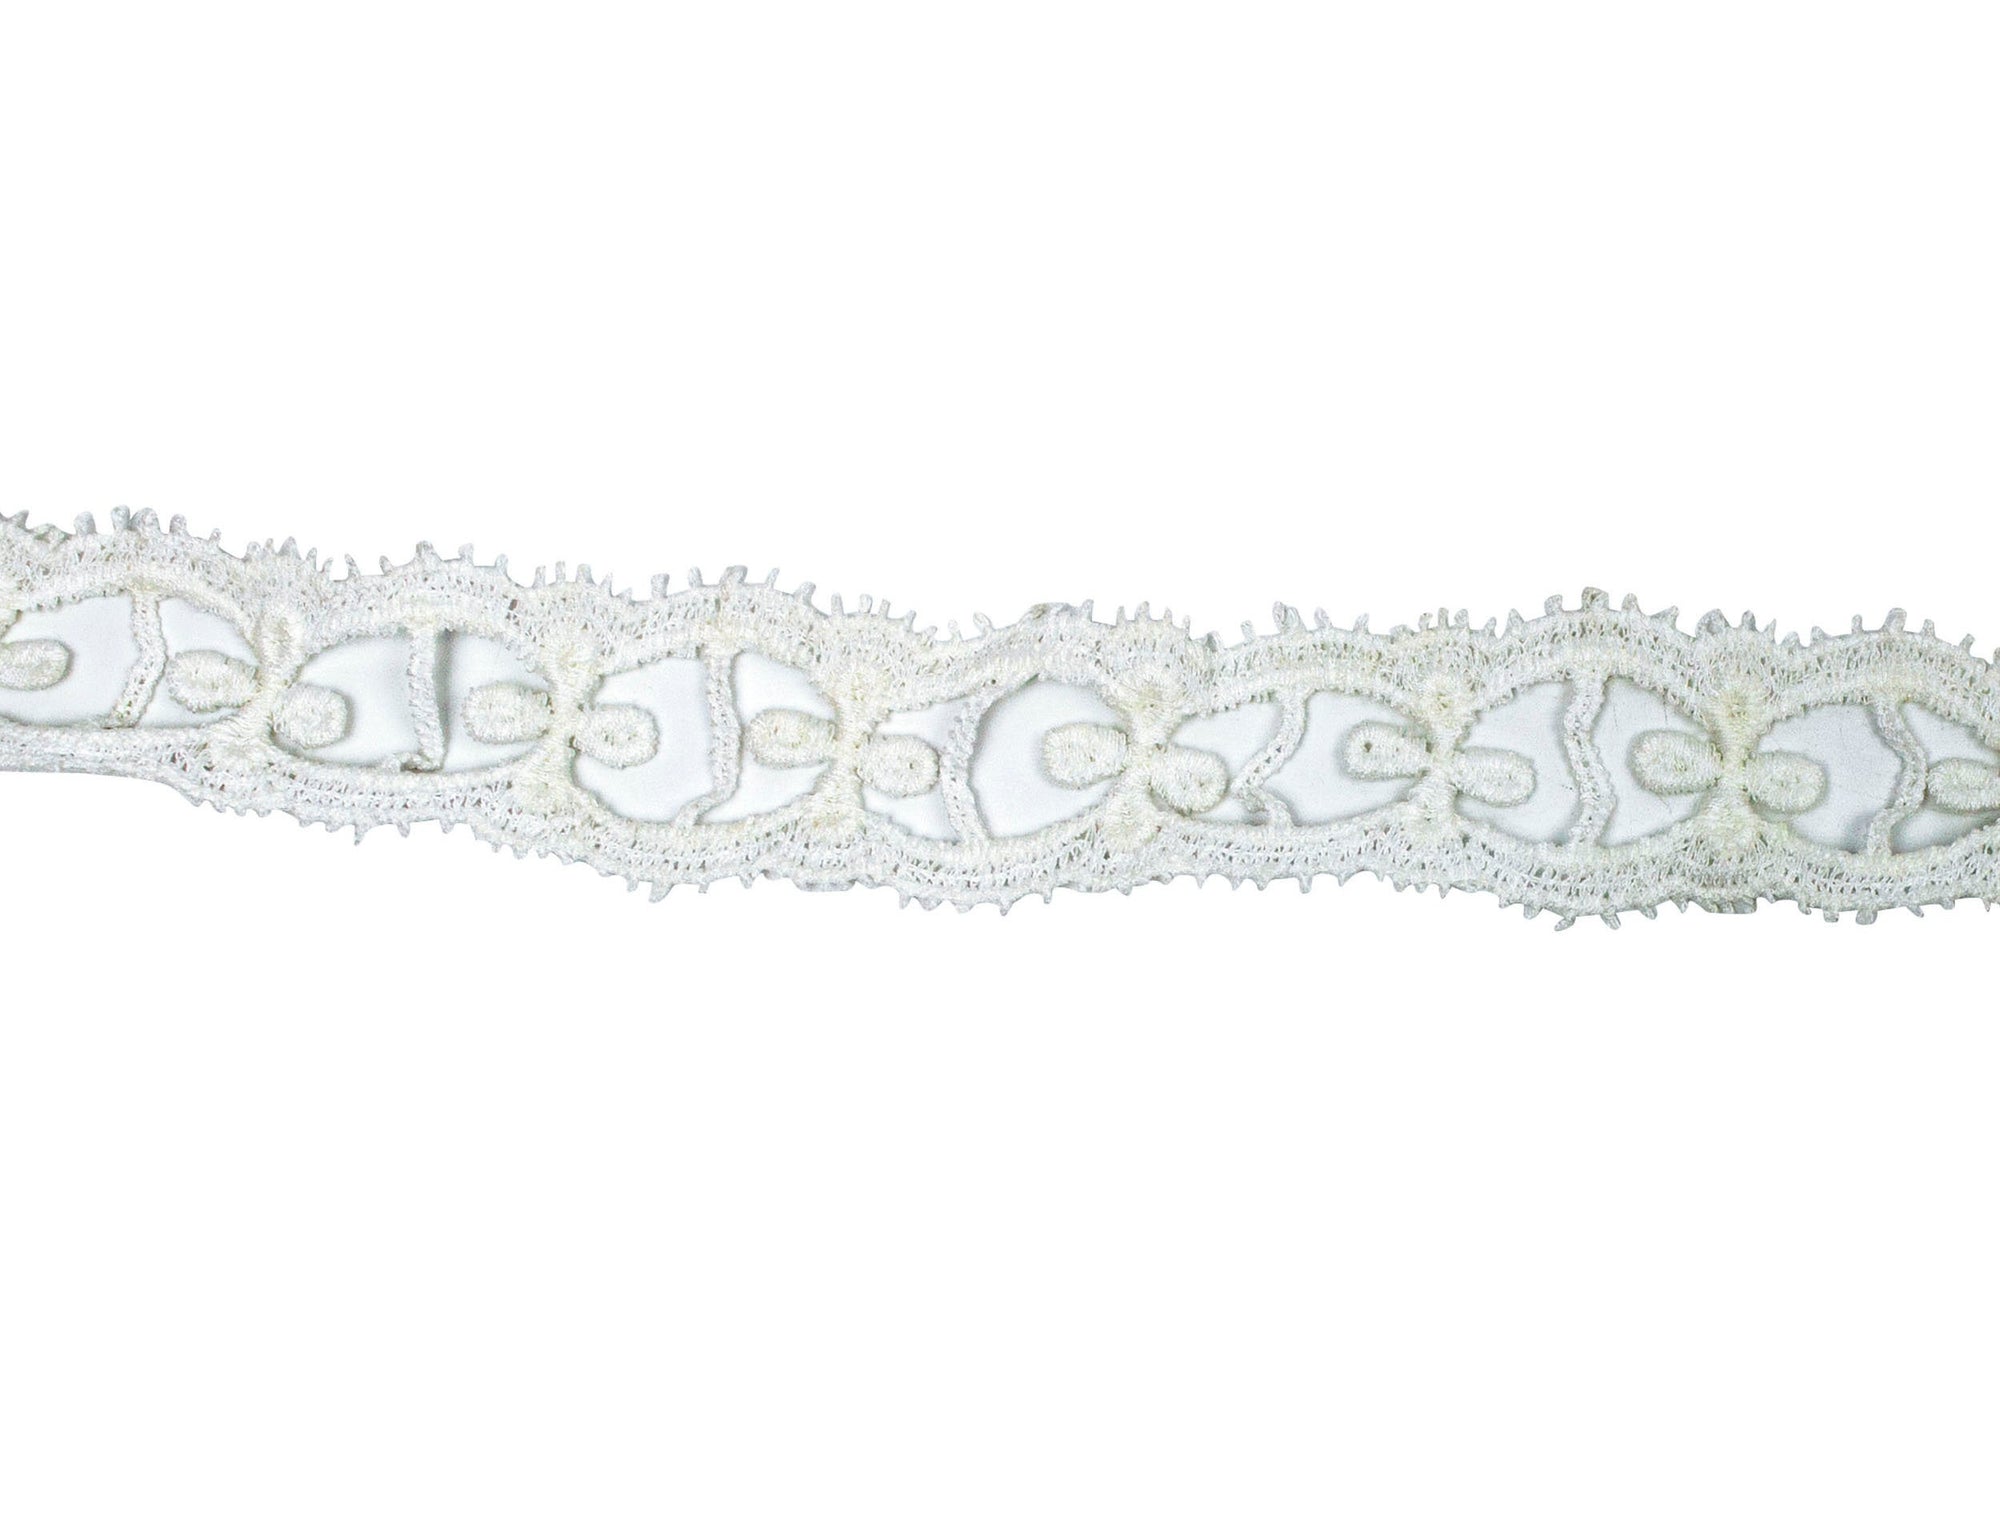 Vintage Lace Trim White Open Crochet 1 1/4" Wide - Sold by the Yard - Humboldt Haberdashery